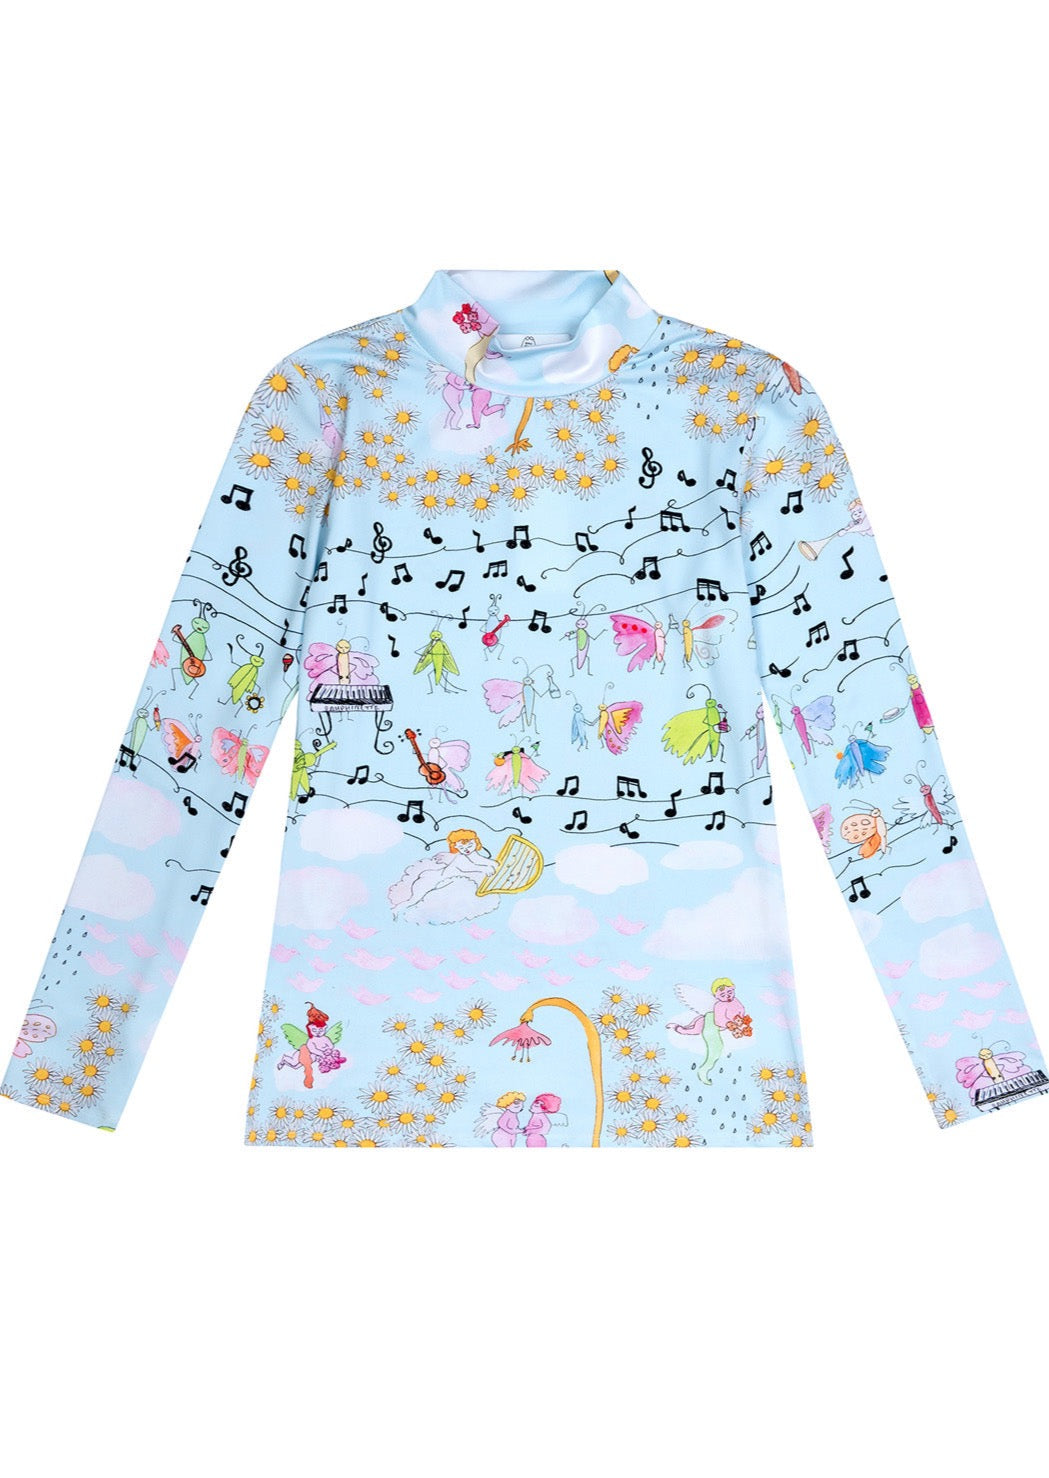 Our signature body-hugging turtleneck in Bad Girls Go to Heaven print. Meticulously joyful, Bad Girls Go to Heaven features hand-illustrated in happy dancing bugs and high-flying cherubs.